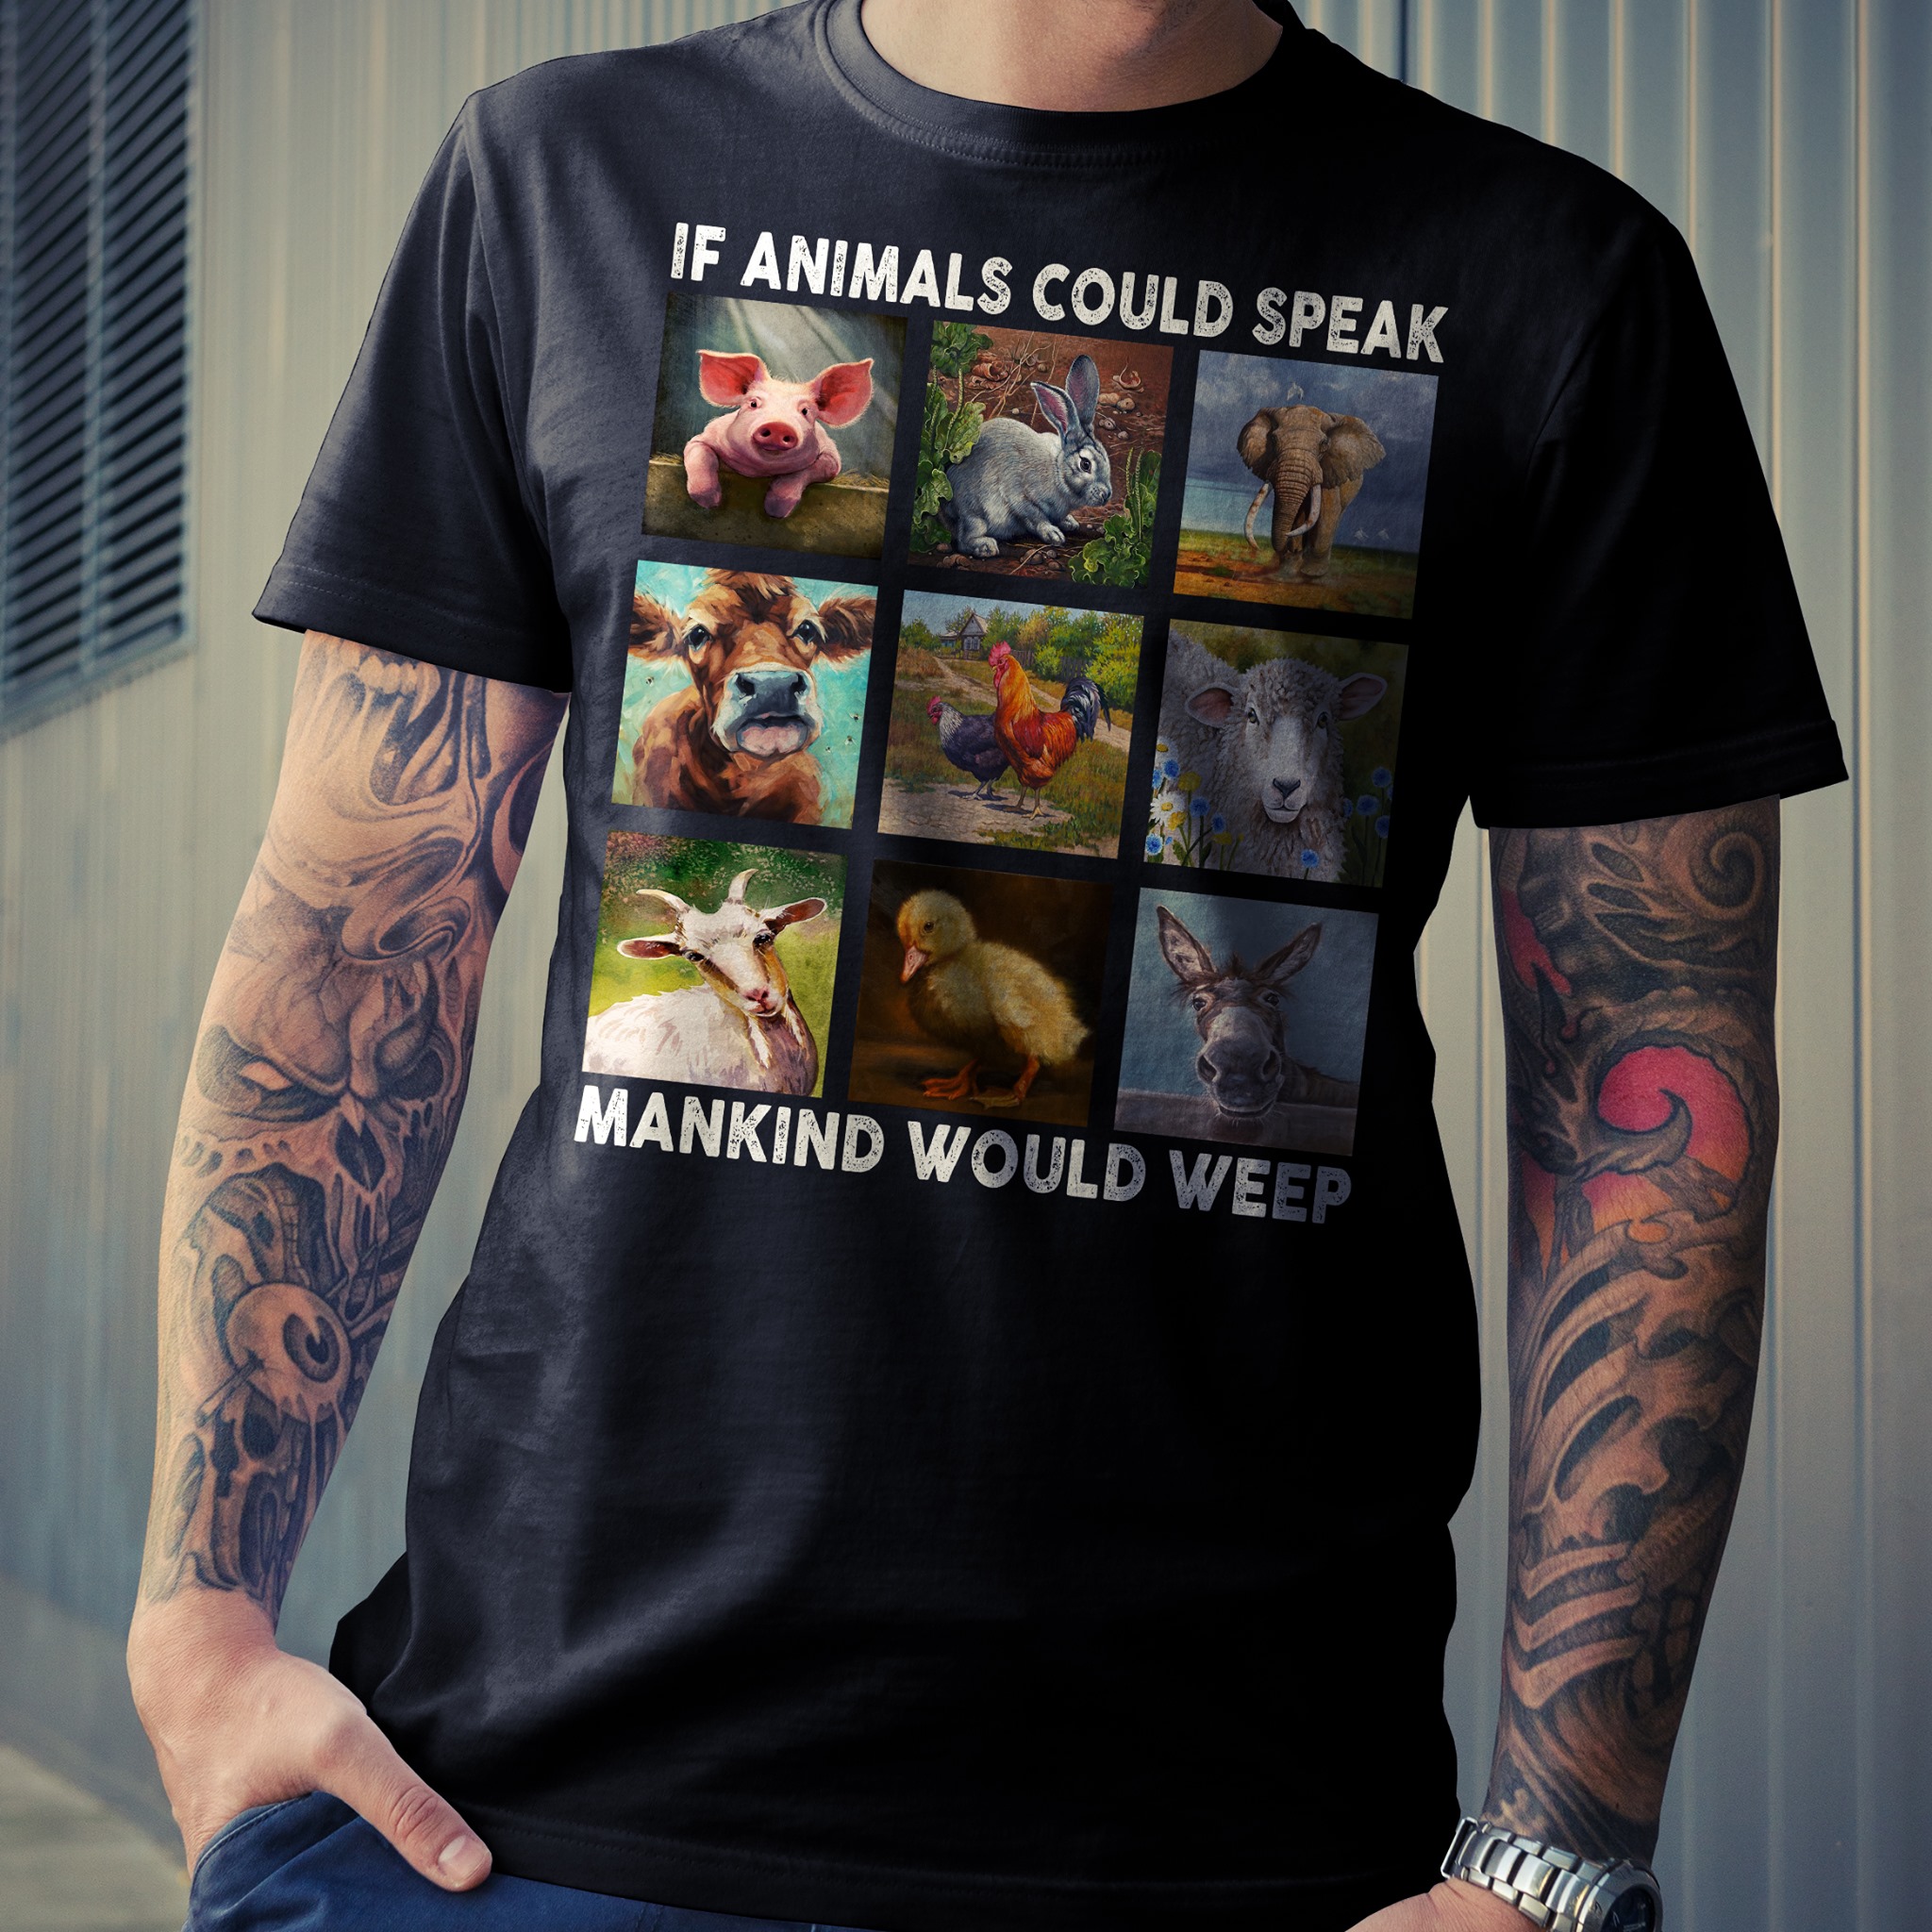 If animals could speak mankind would weep - Animal lover